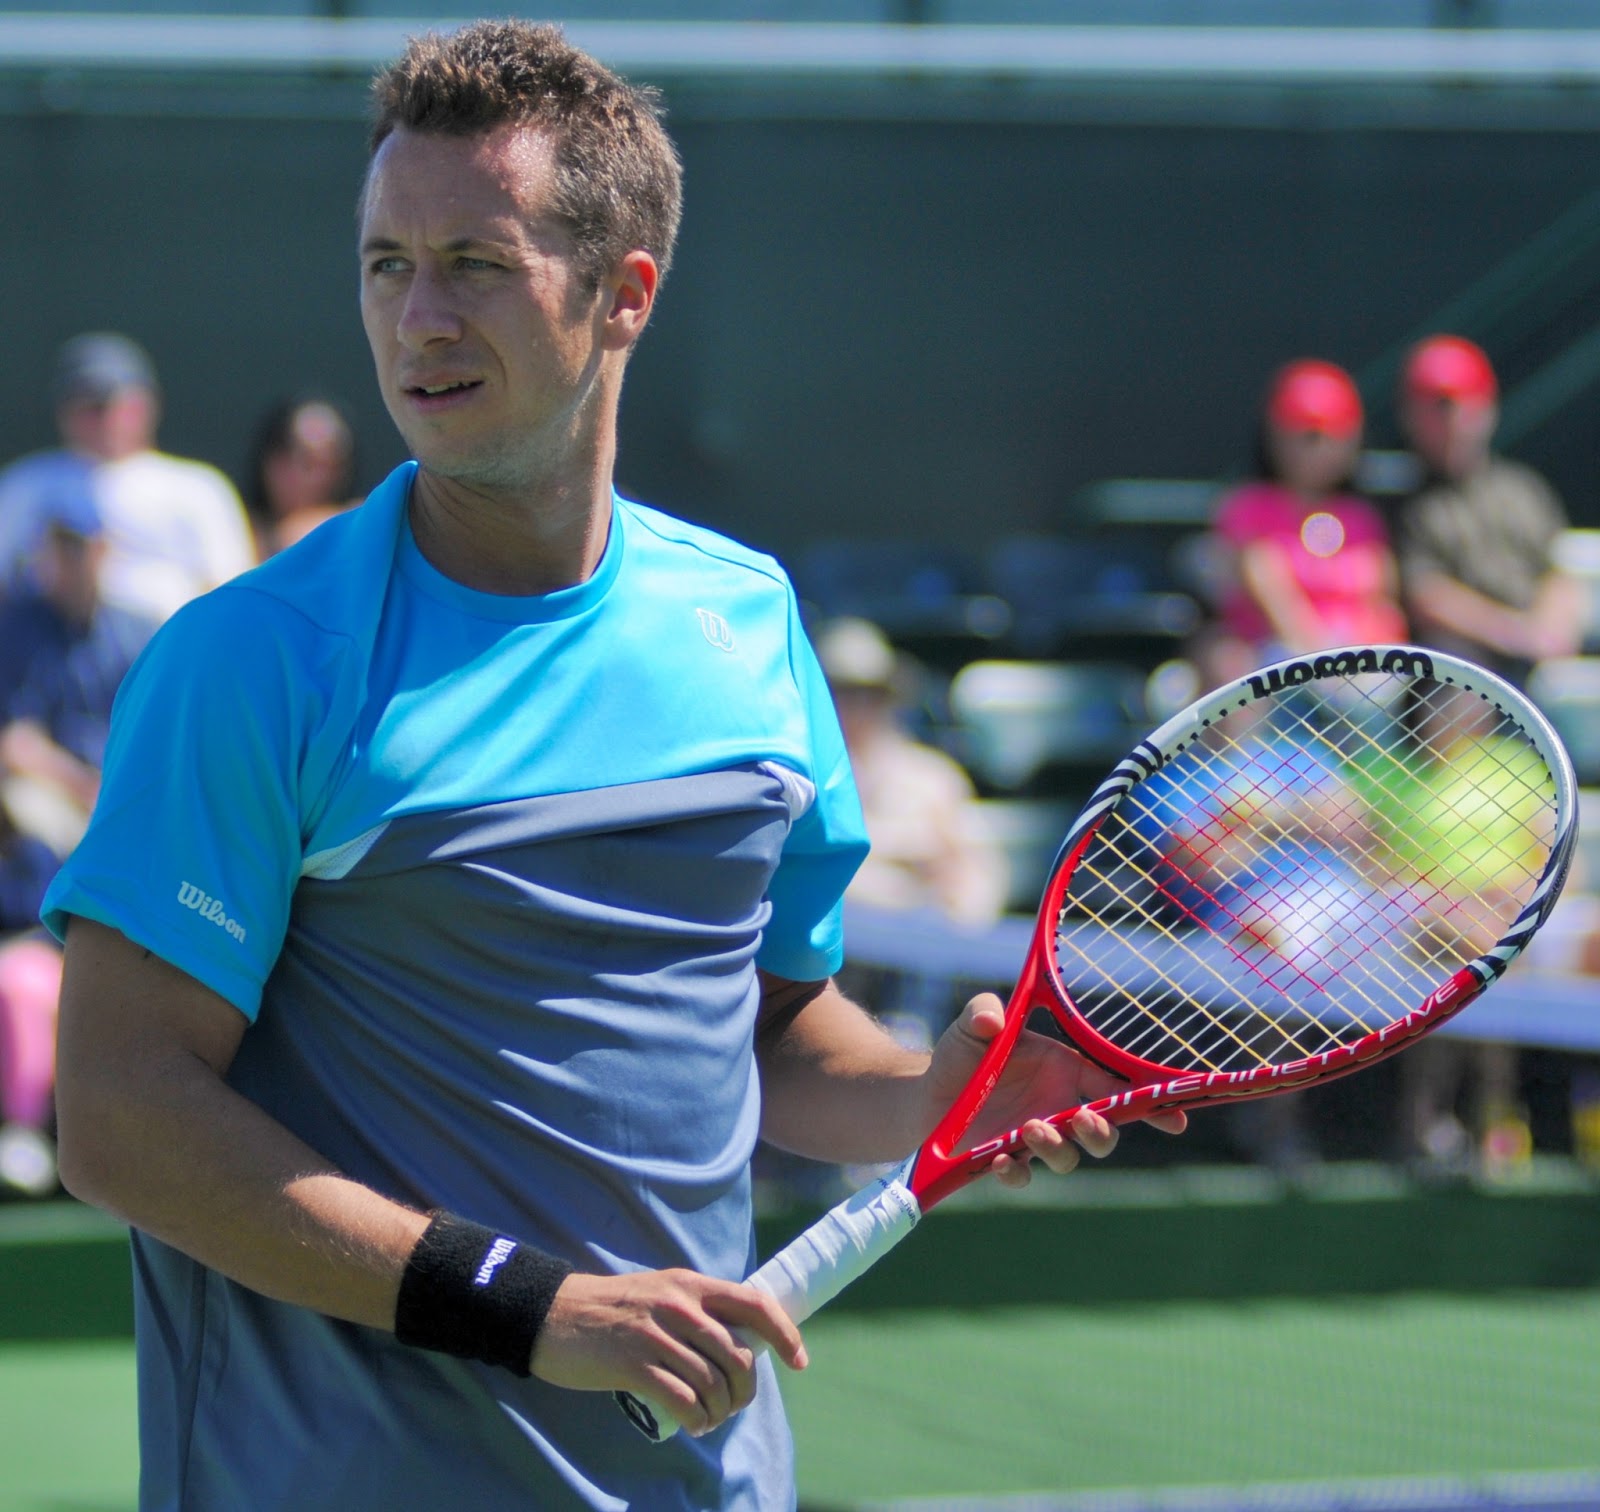 TENNIS: Philipp Kohlschreiber Profile and Images1600 x 1512